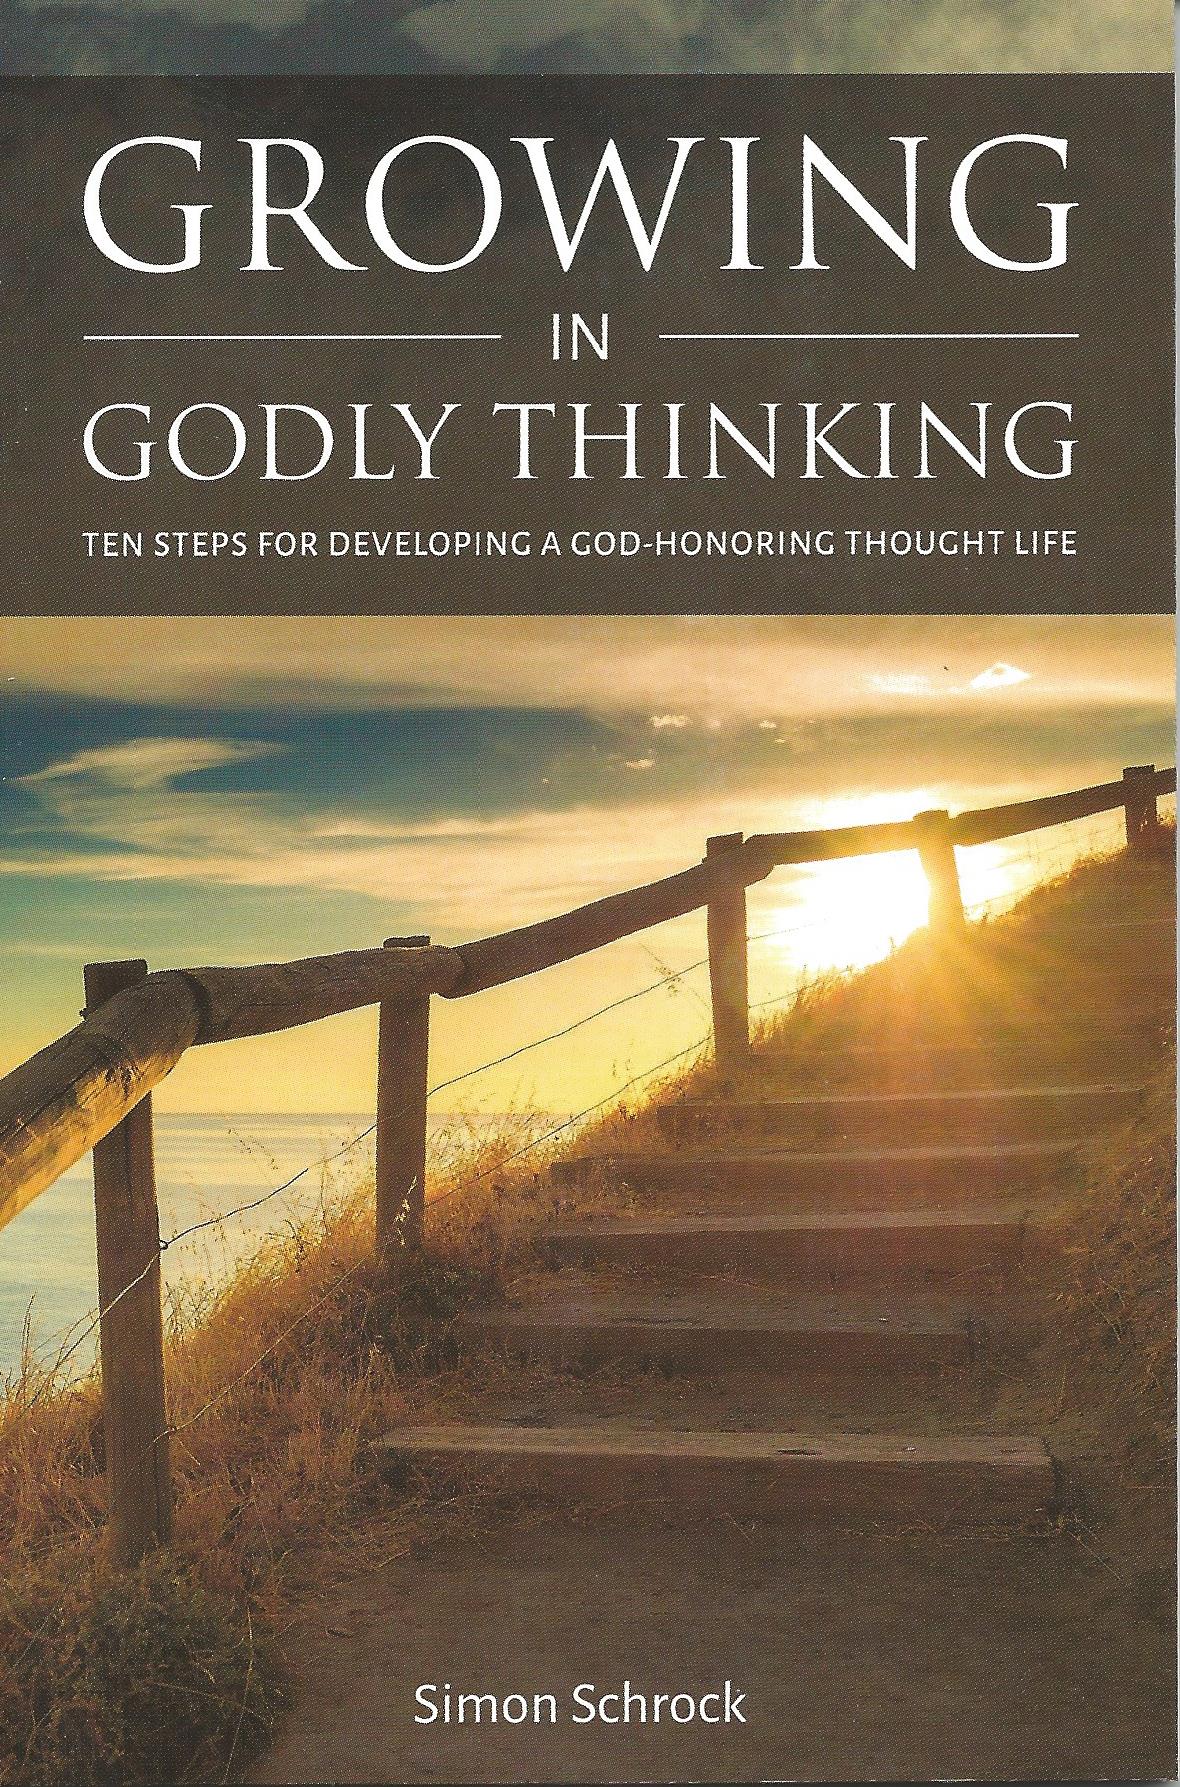 GROWING IN GODLY THINKING Simon Schrock